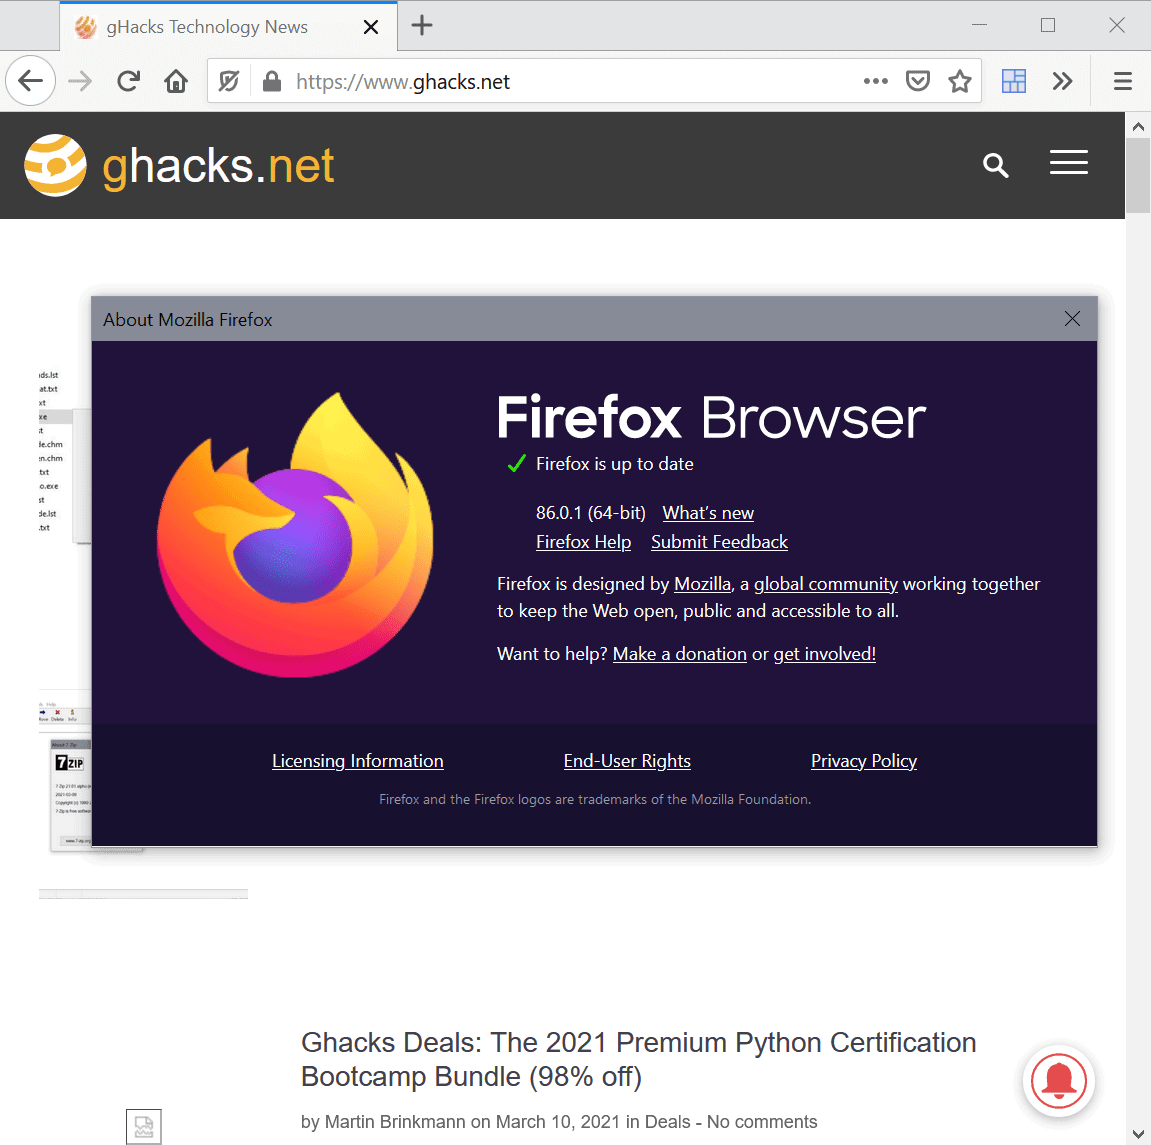 Firefox 86.0.1 will be released later today, here is what is new